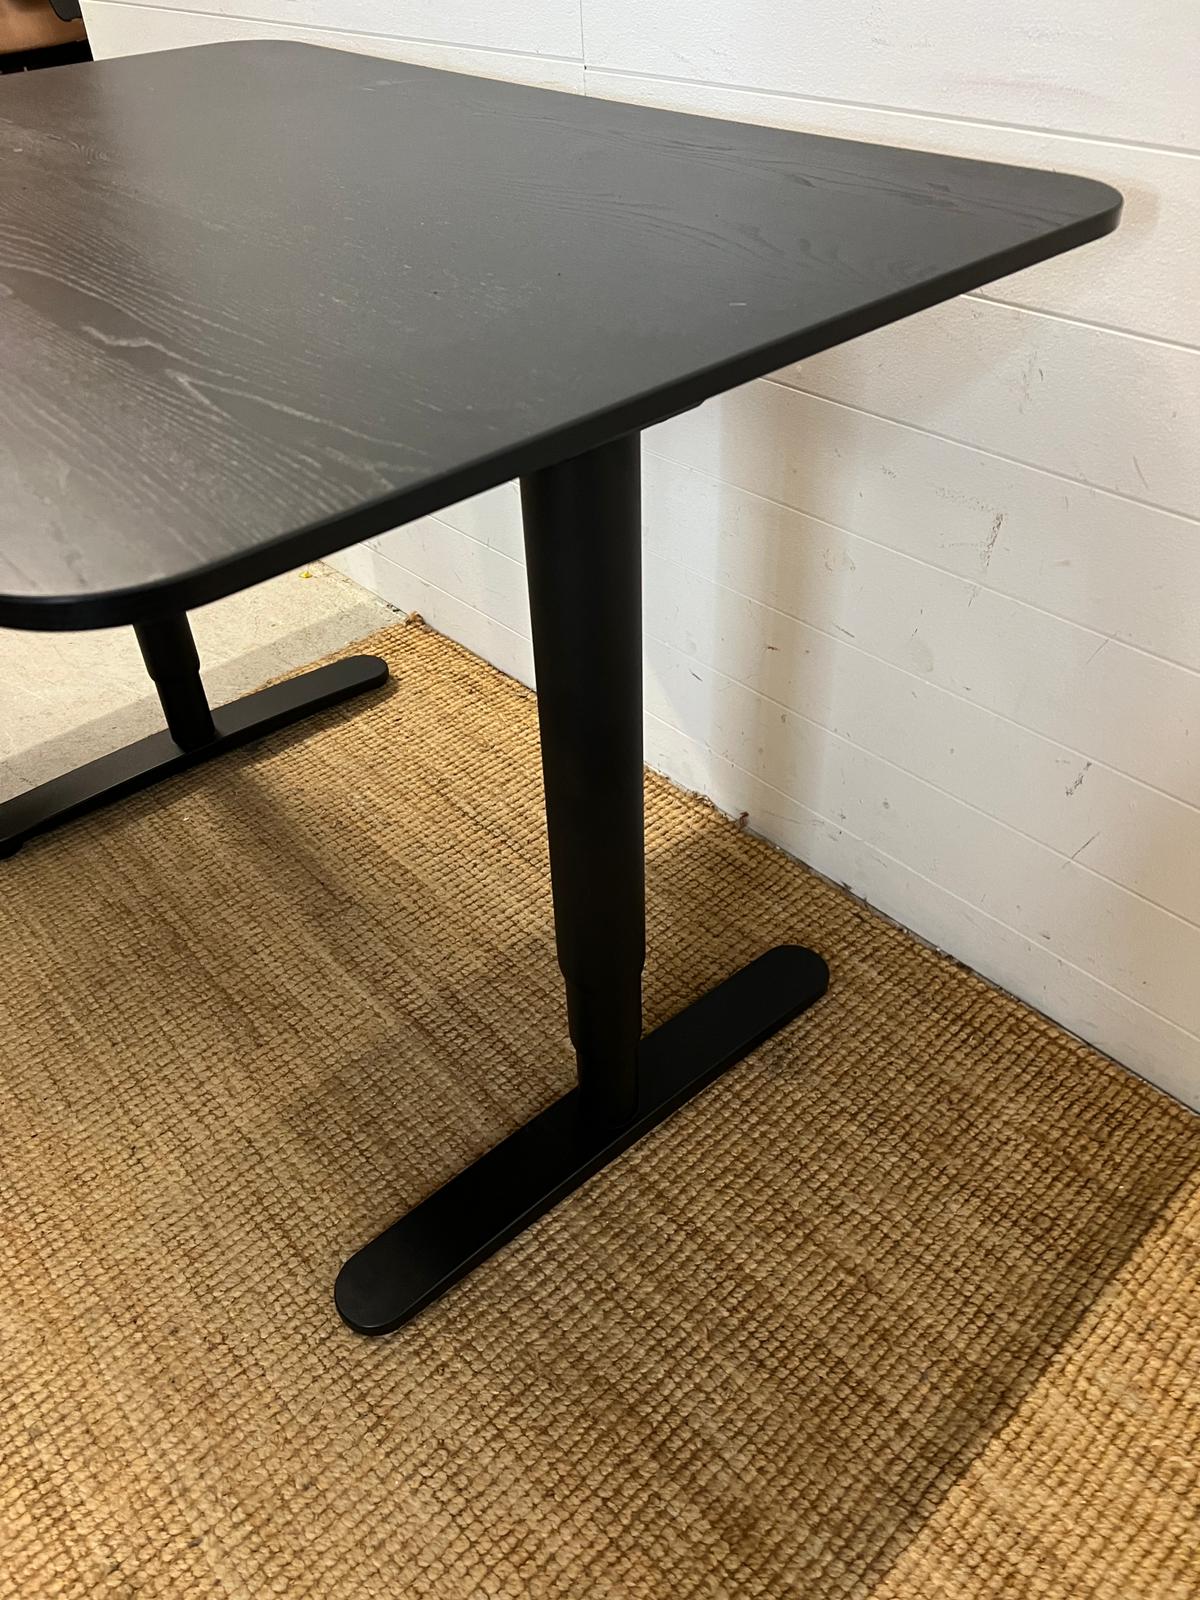 A Bekant Ikea desk with adjustable height (W120cm D80cm) - Image 6 of 6